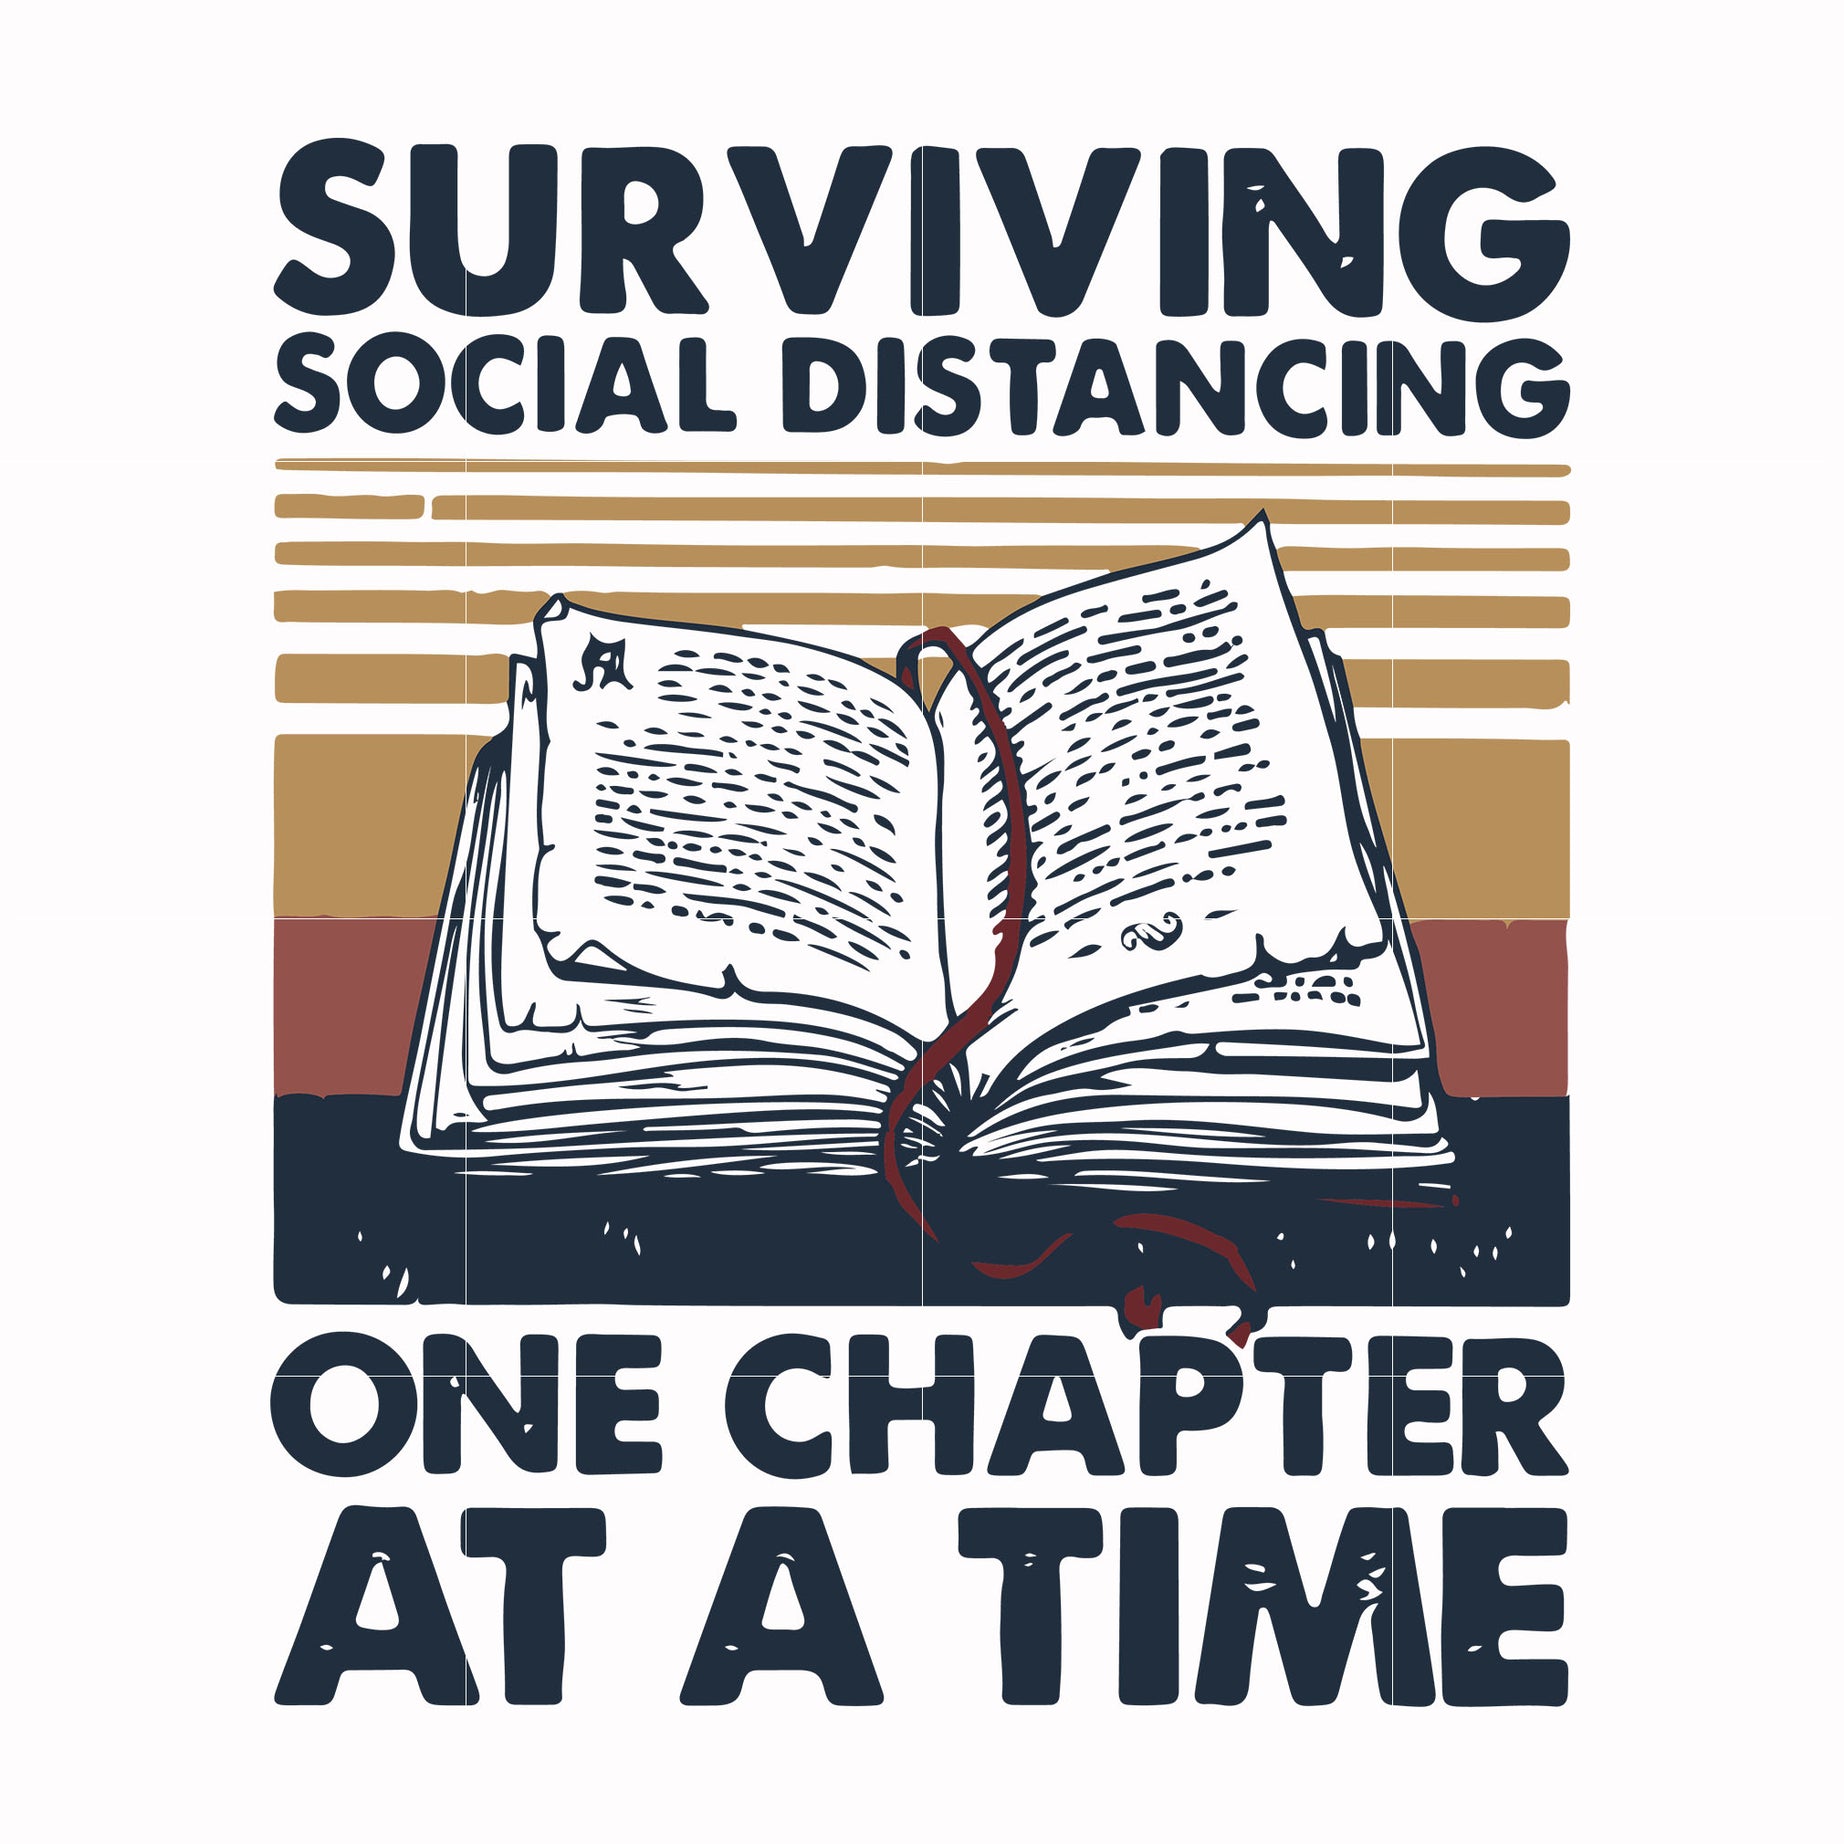 Surviving social distancing one chapter at a time svg, png, dxf, eps digital file TD29072026